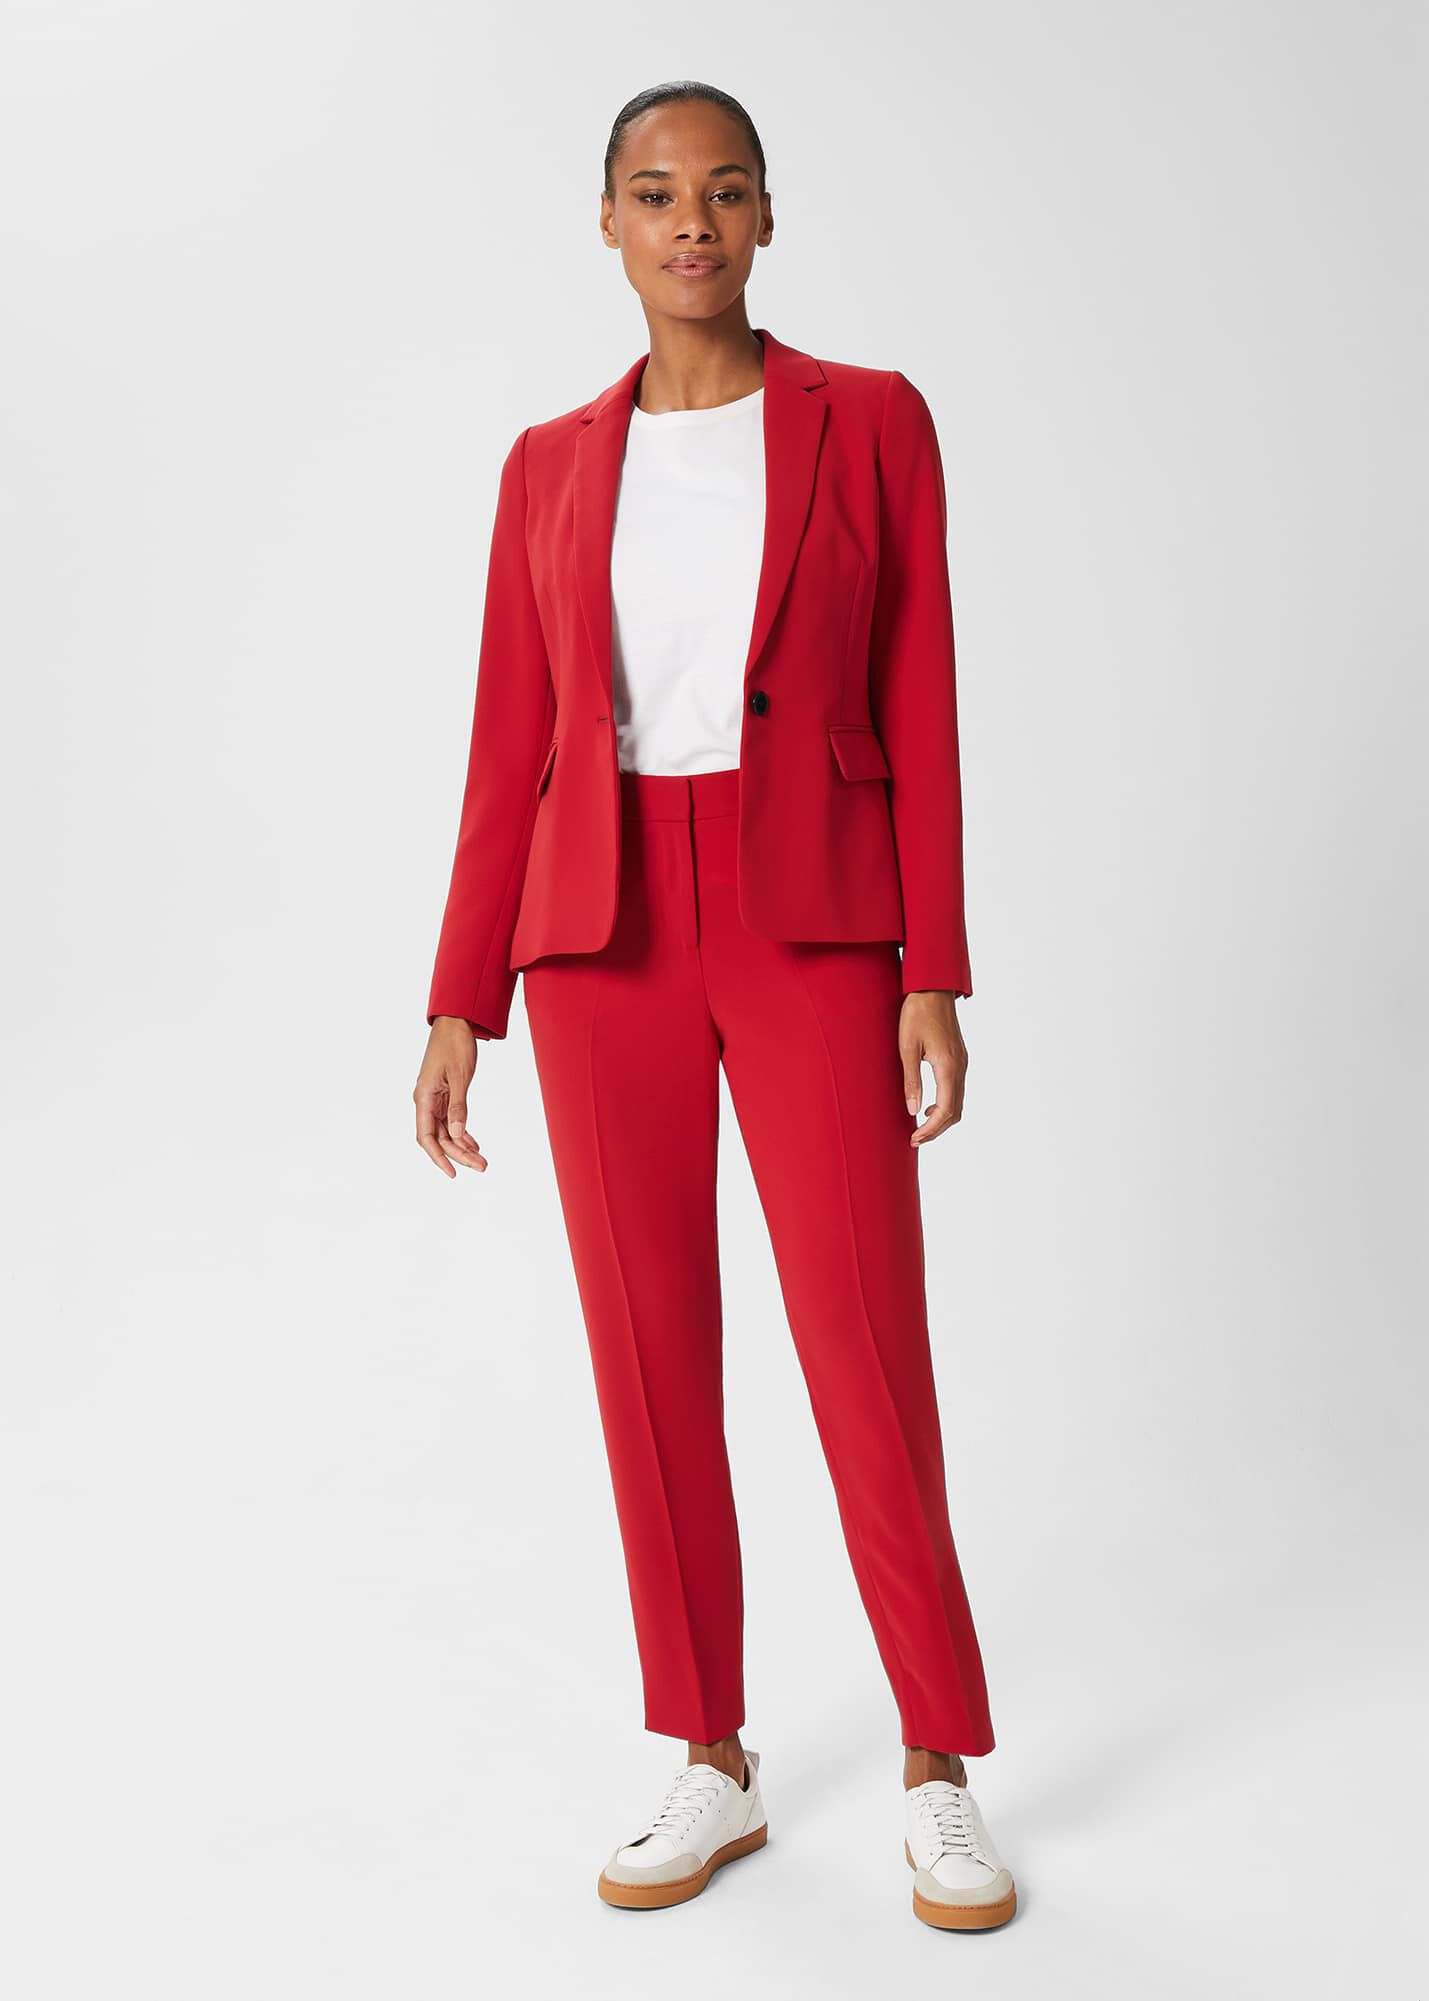 How To Style Women's Trouser Suits | M&S